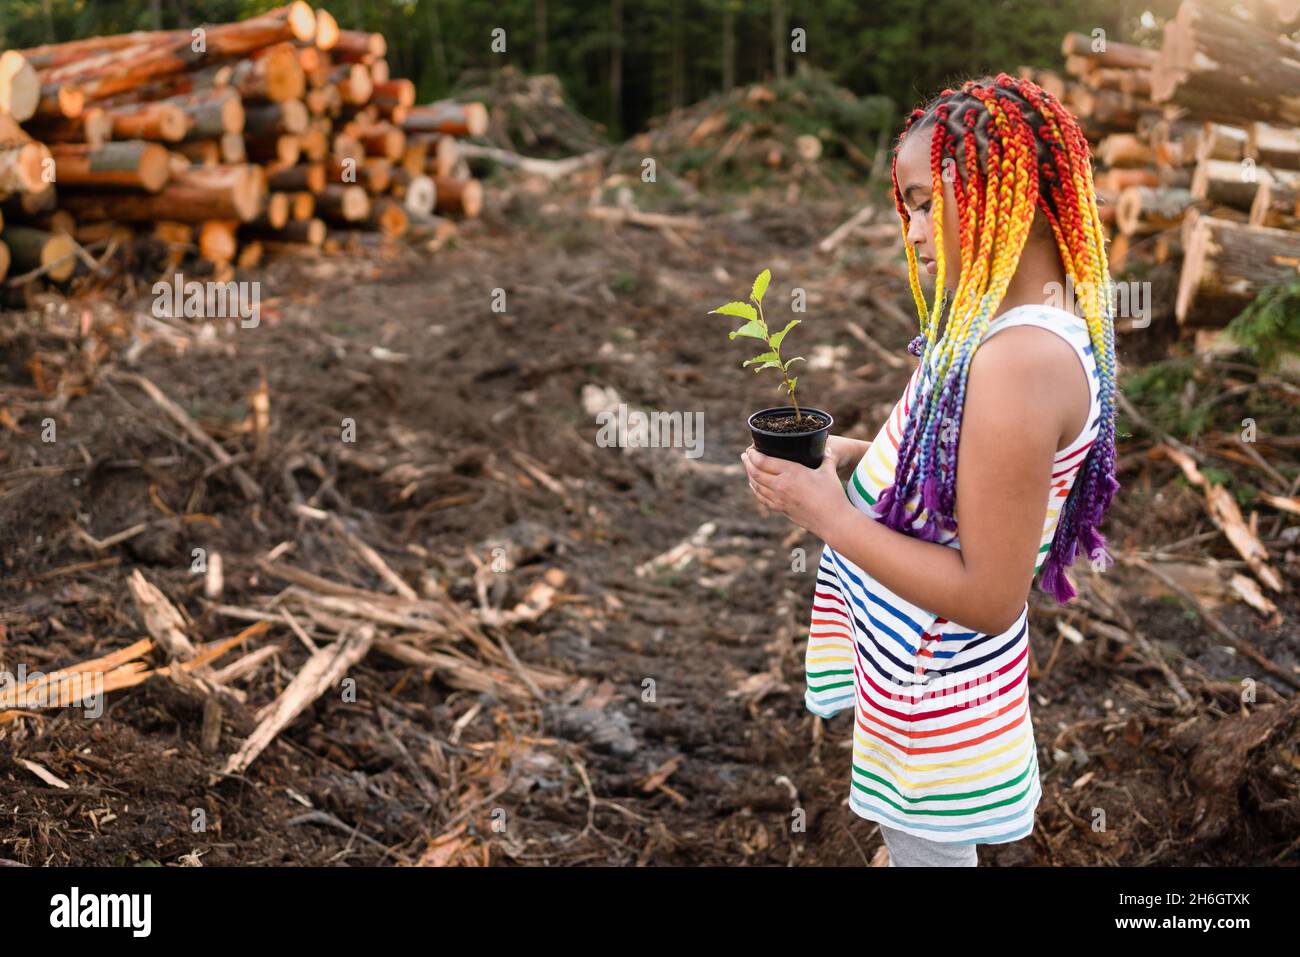 Young mixed race girl with rainbow box braids stands on logging site holding a tree sapling to plant. Stock Photo